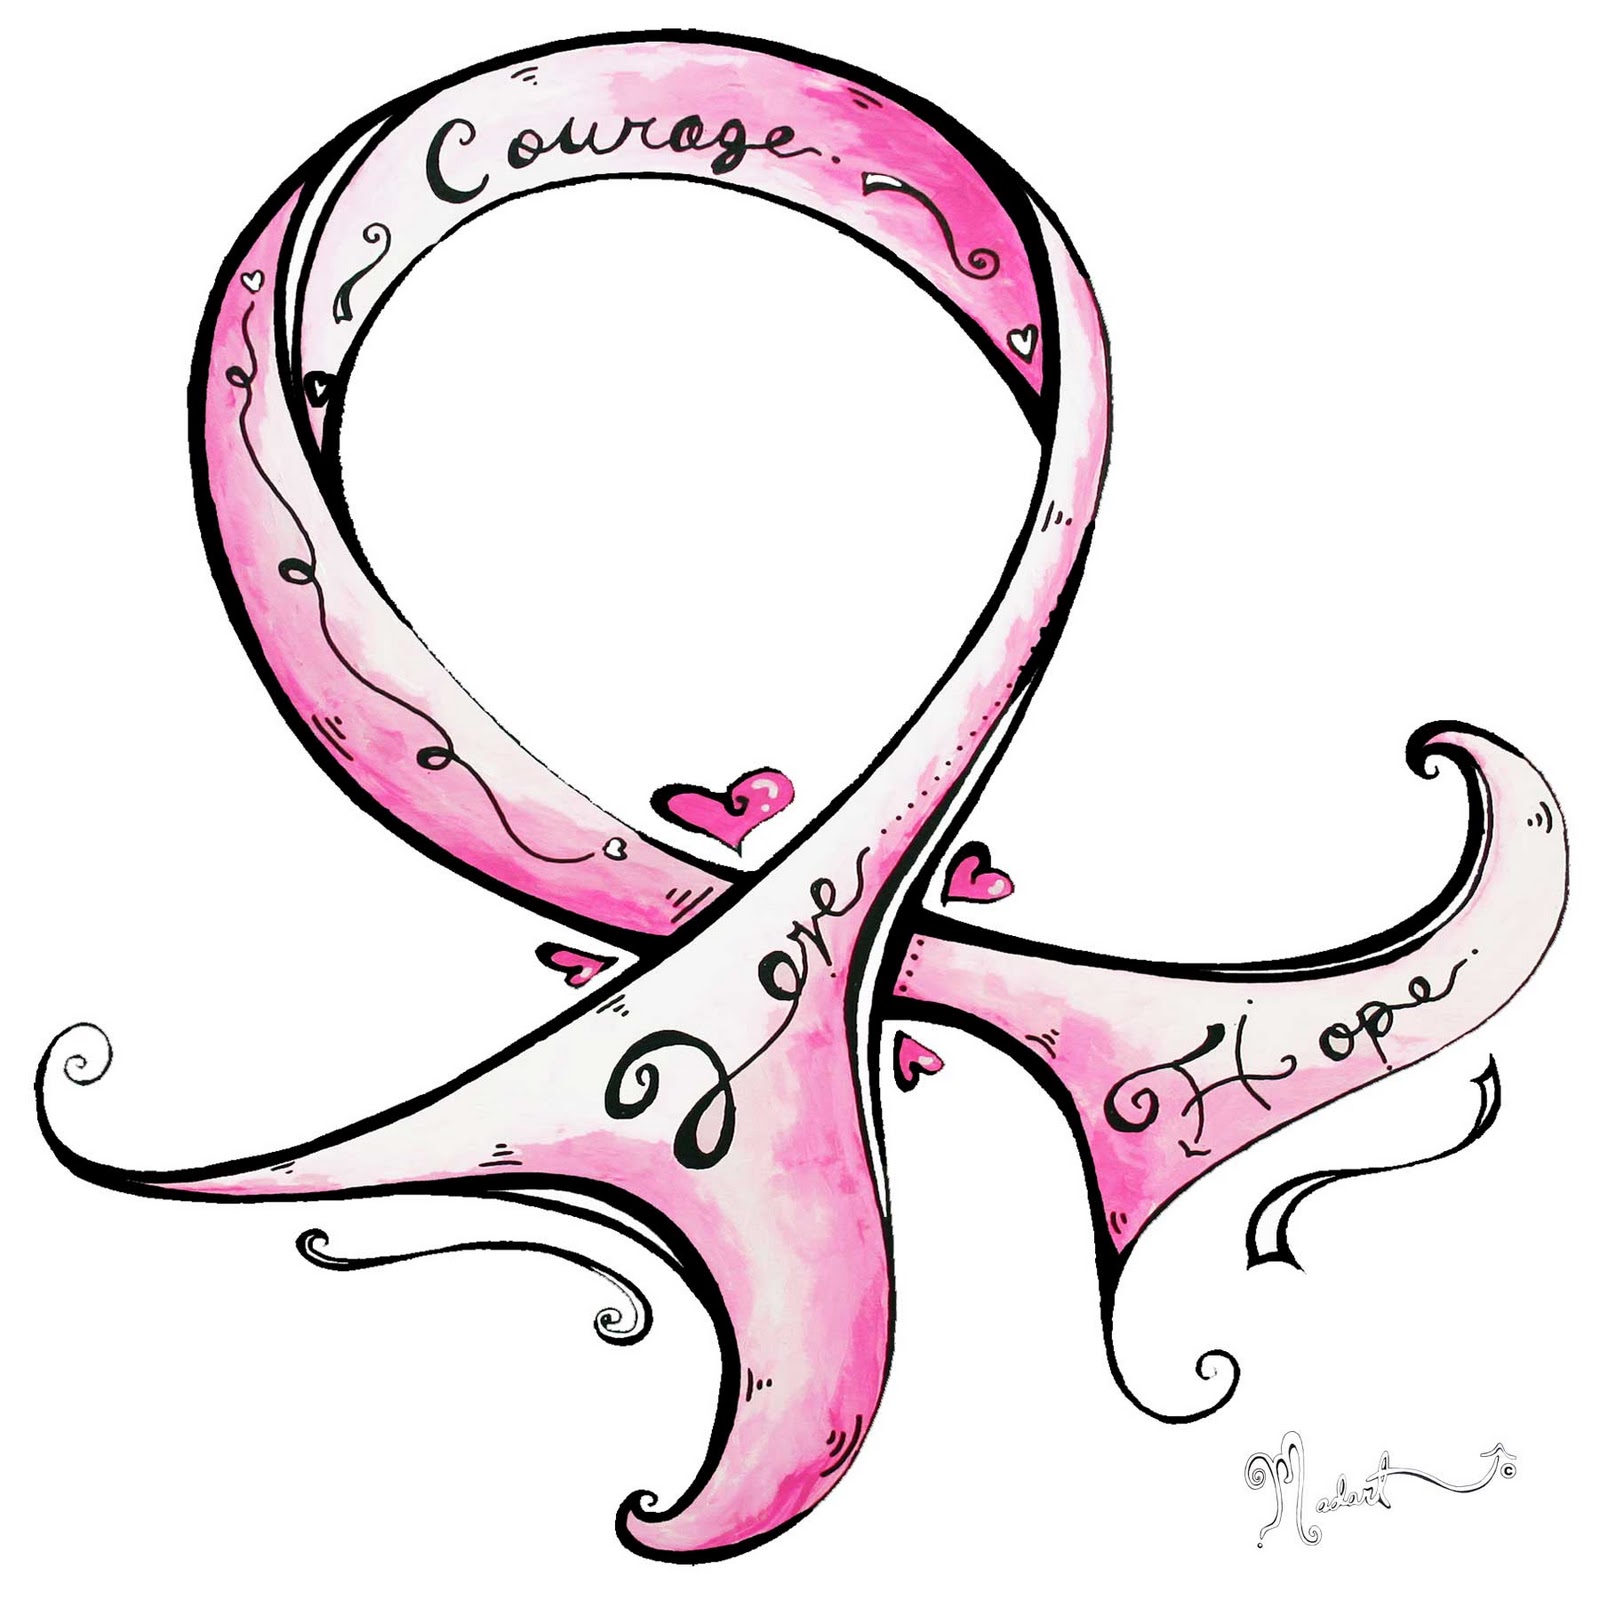 Images For > Cancer Heart Ribbon Clip Art